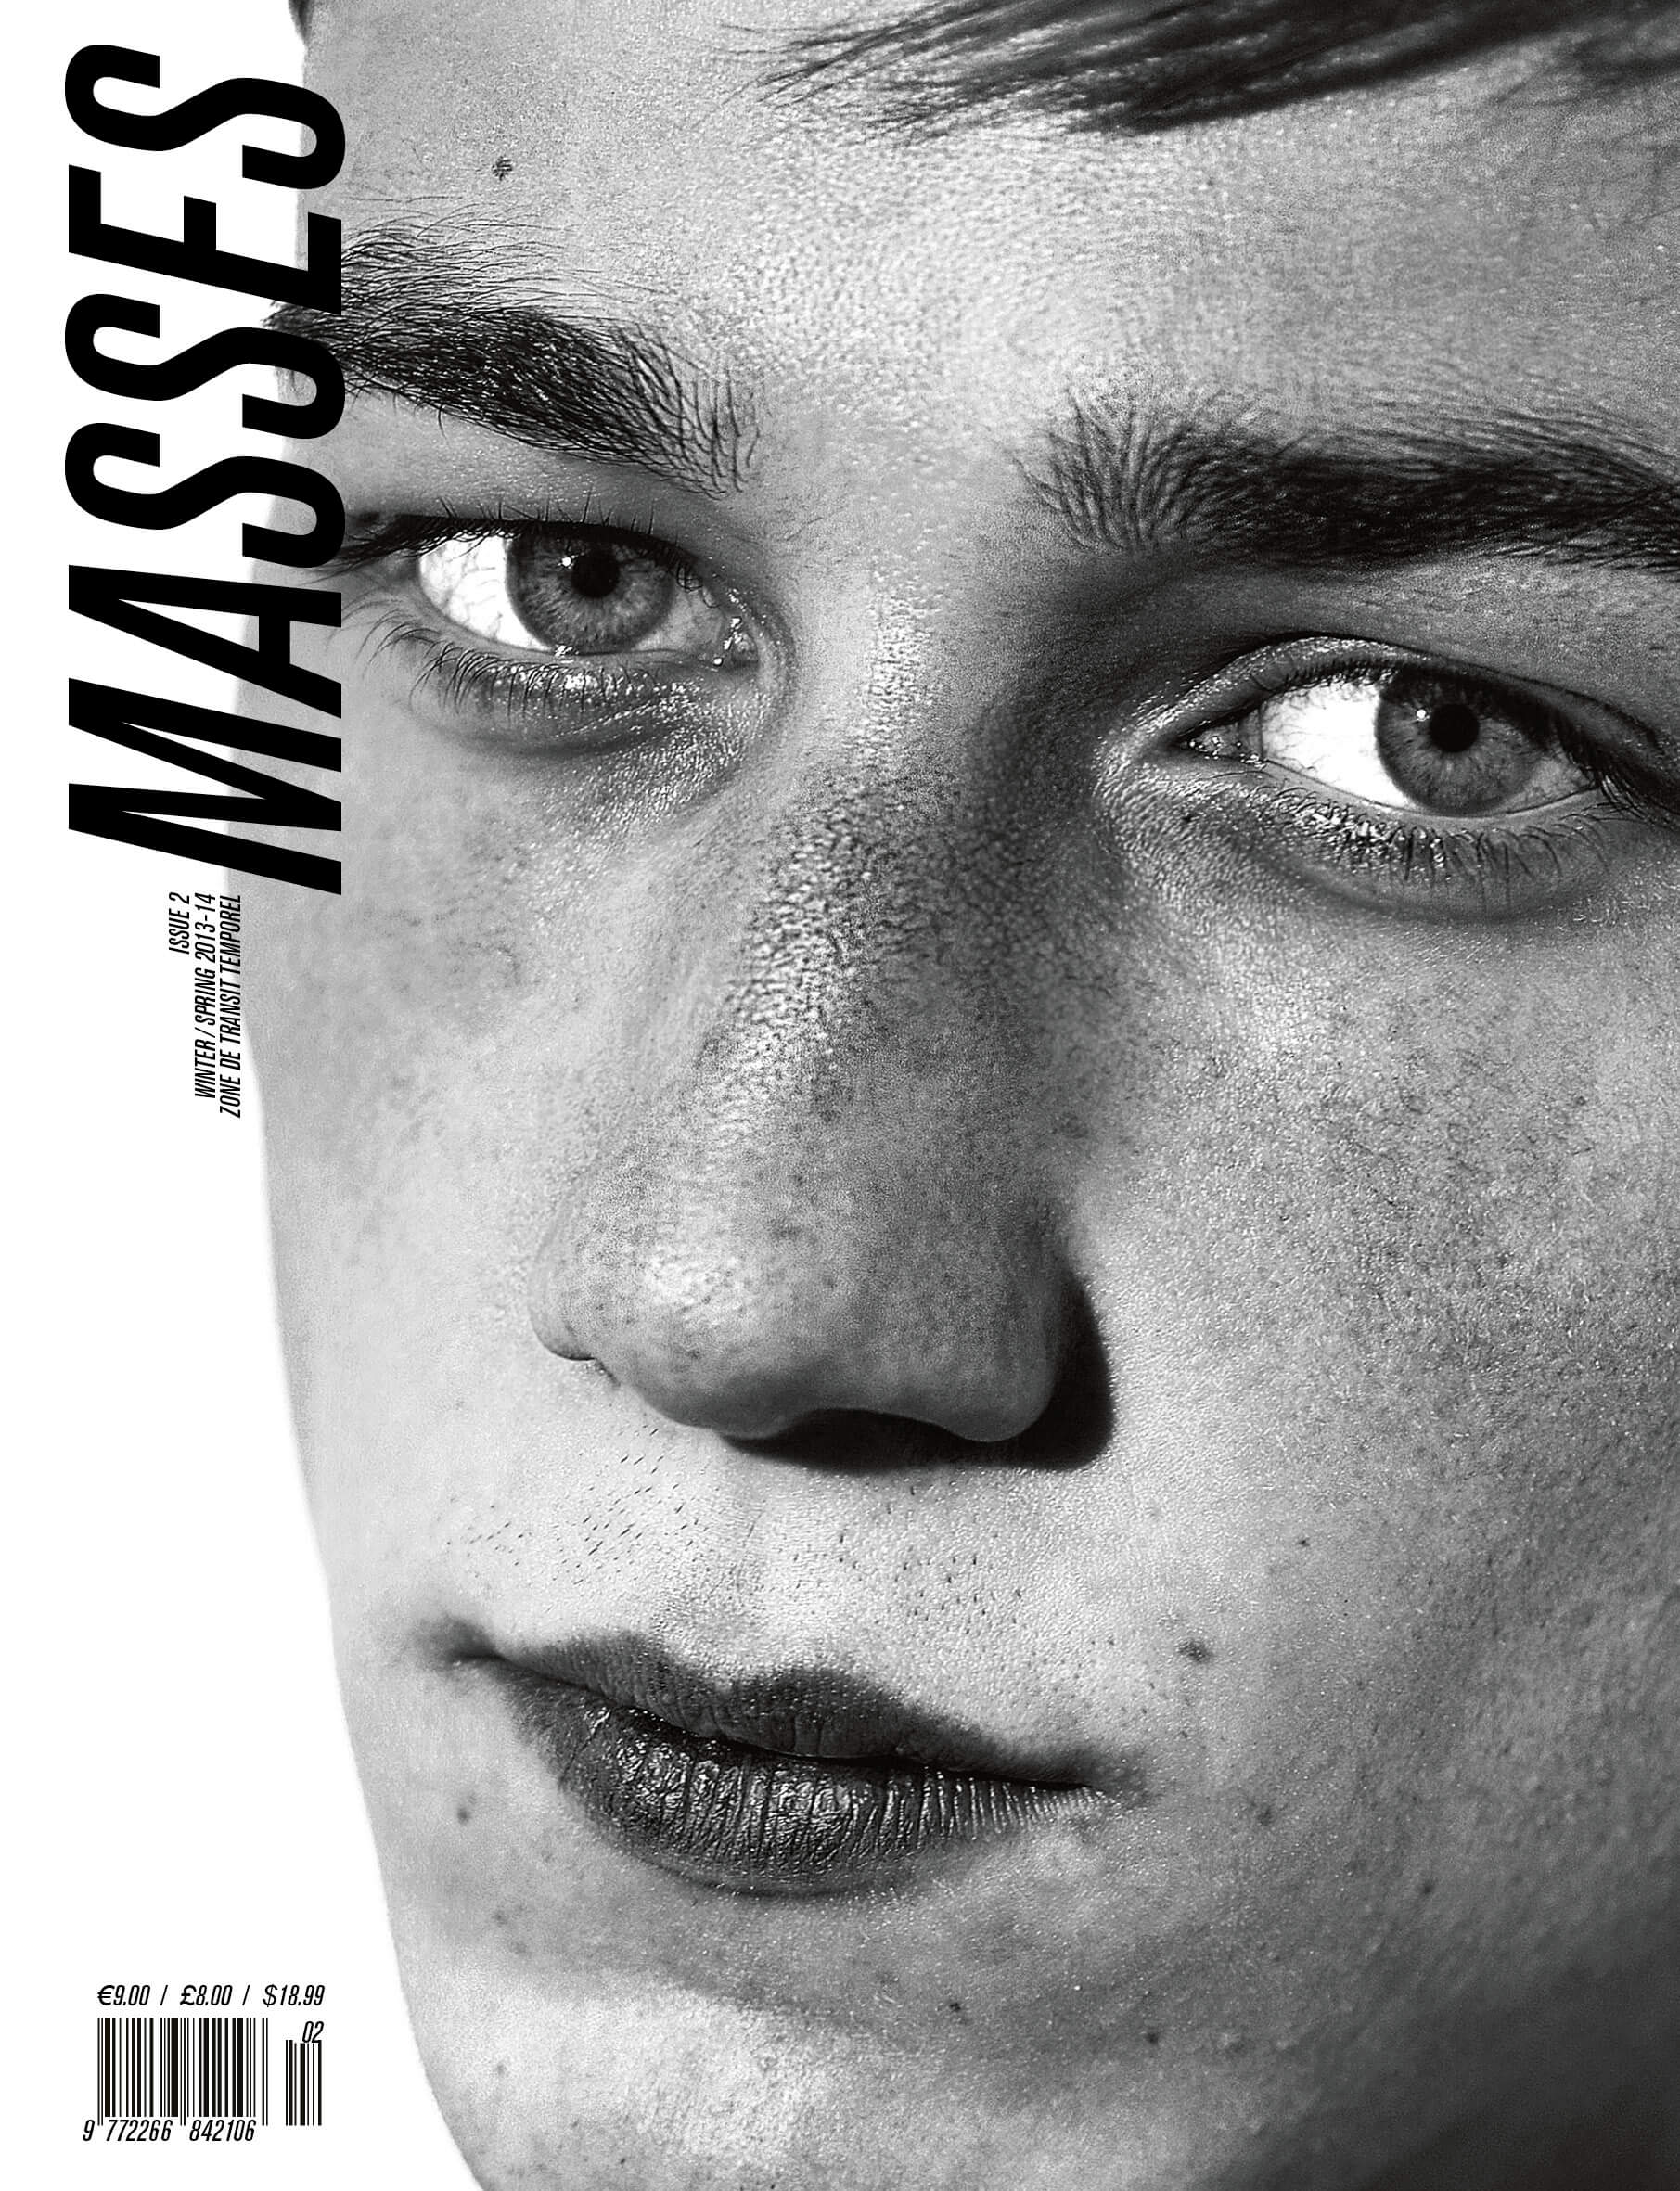 MASSES Magazine Issue No. 2 – Cover photographed by Kira Bunse and Eric Diulein & Sacha Quintin with Harvey James